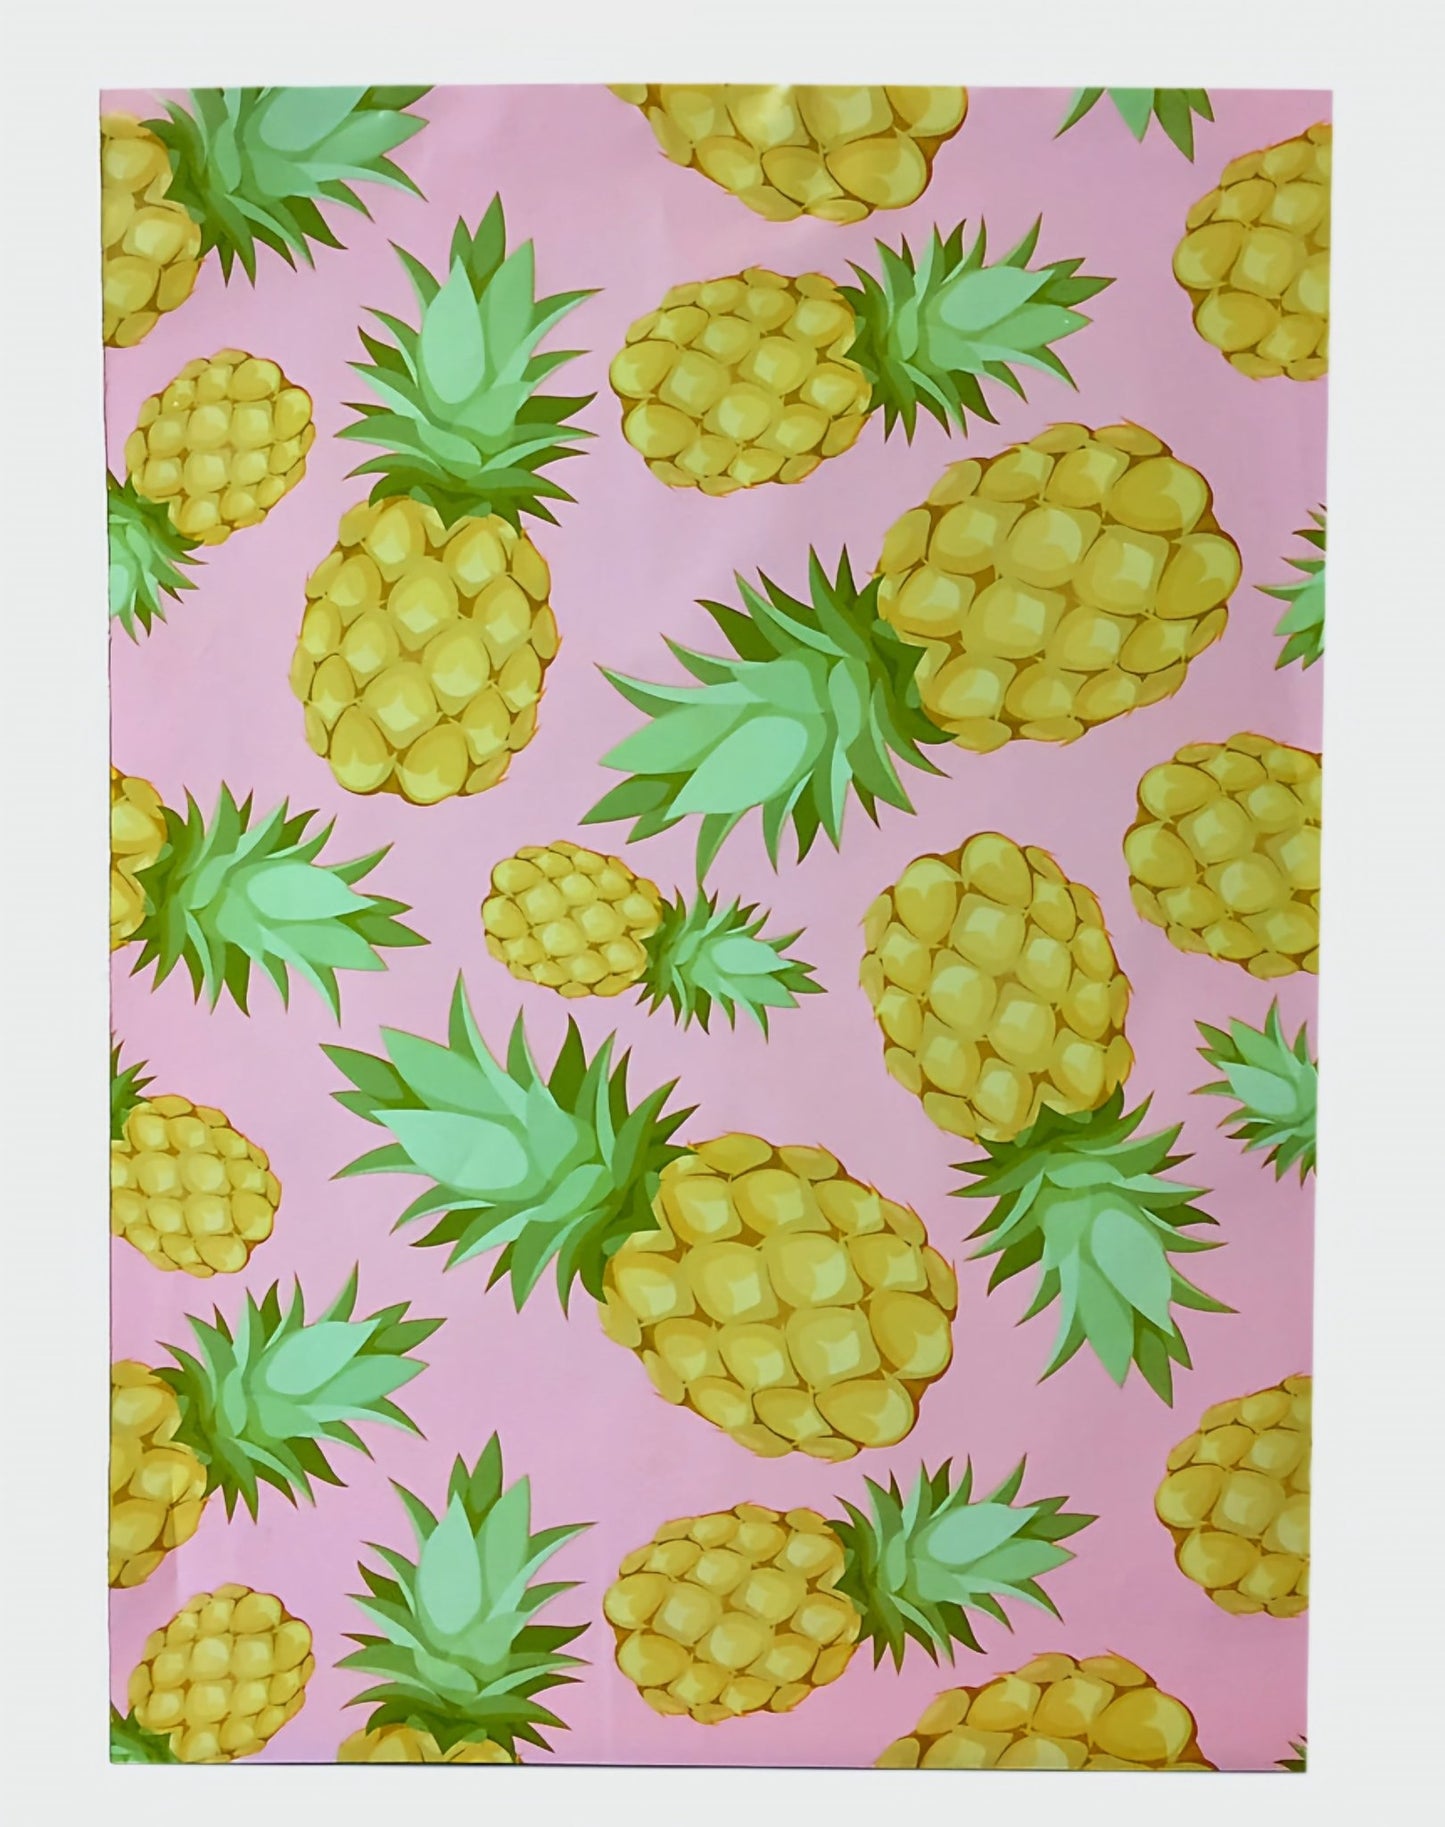 Pineapple Poly Mailers Size 10x13 Colorful Shipping Bags - Shipping In Style